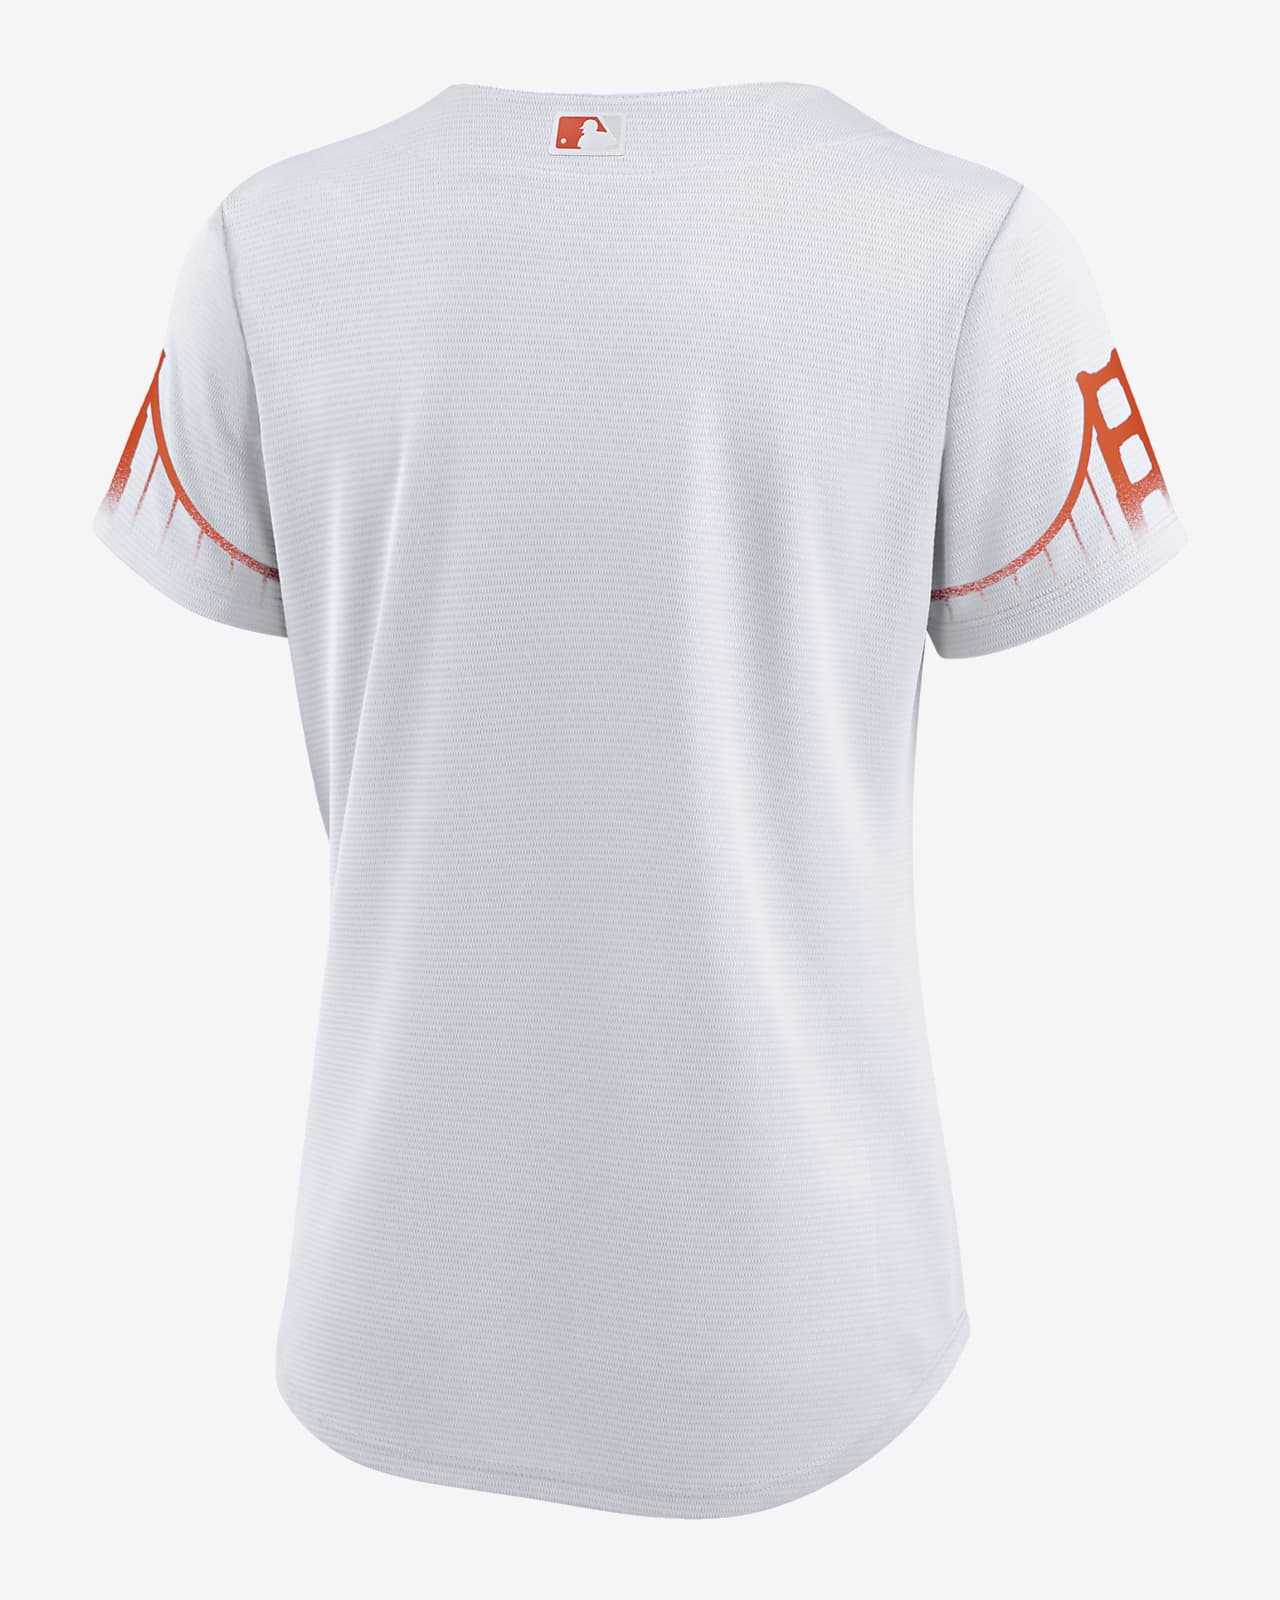 sf giants connect jersey